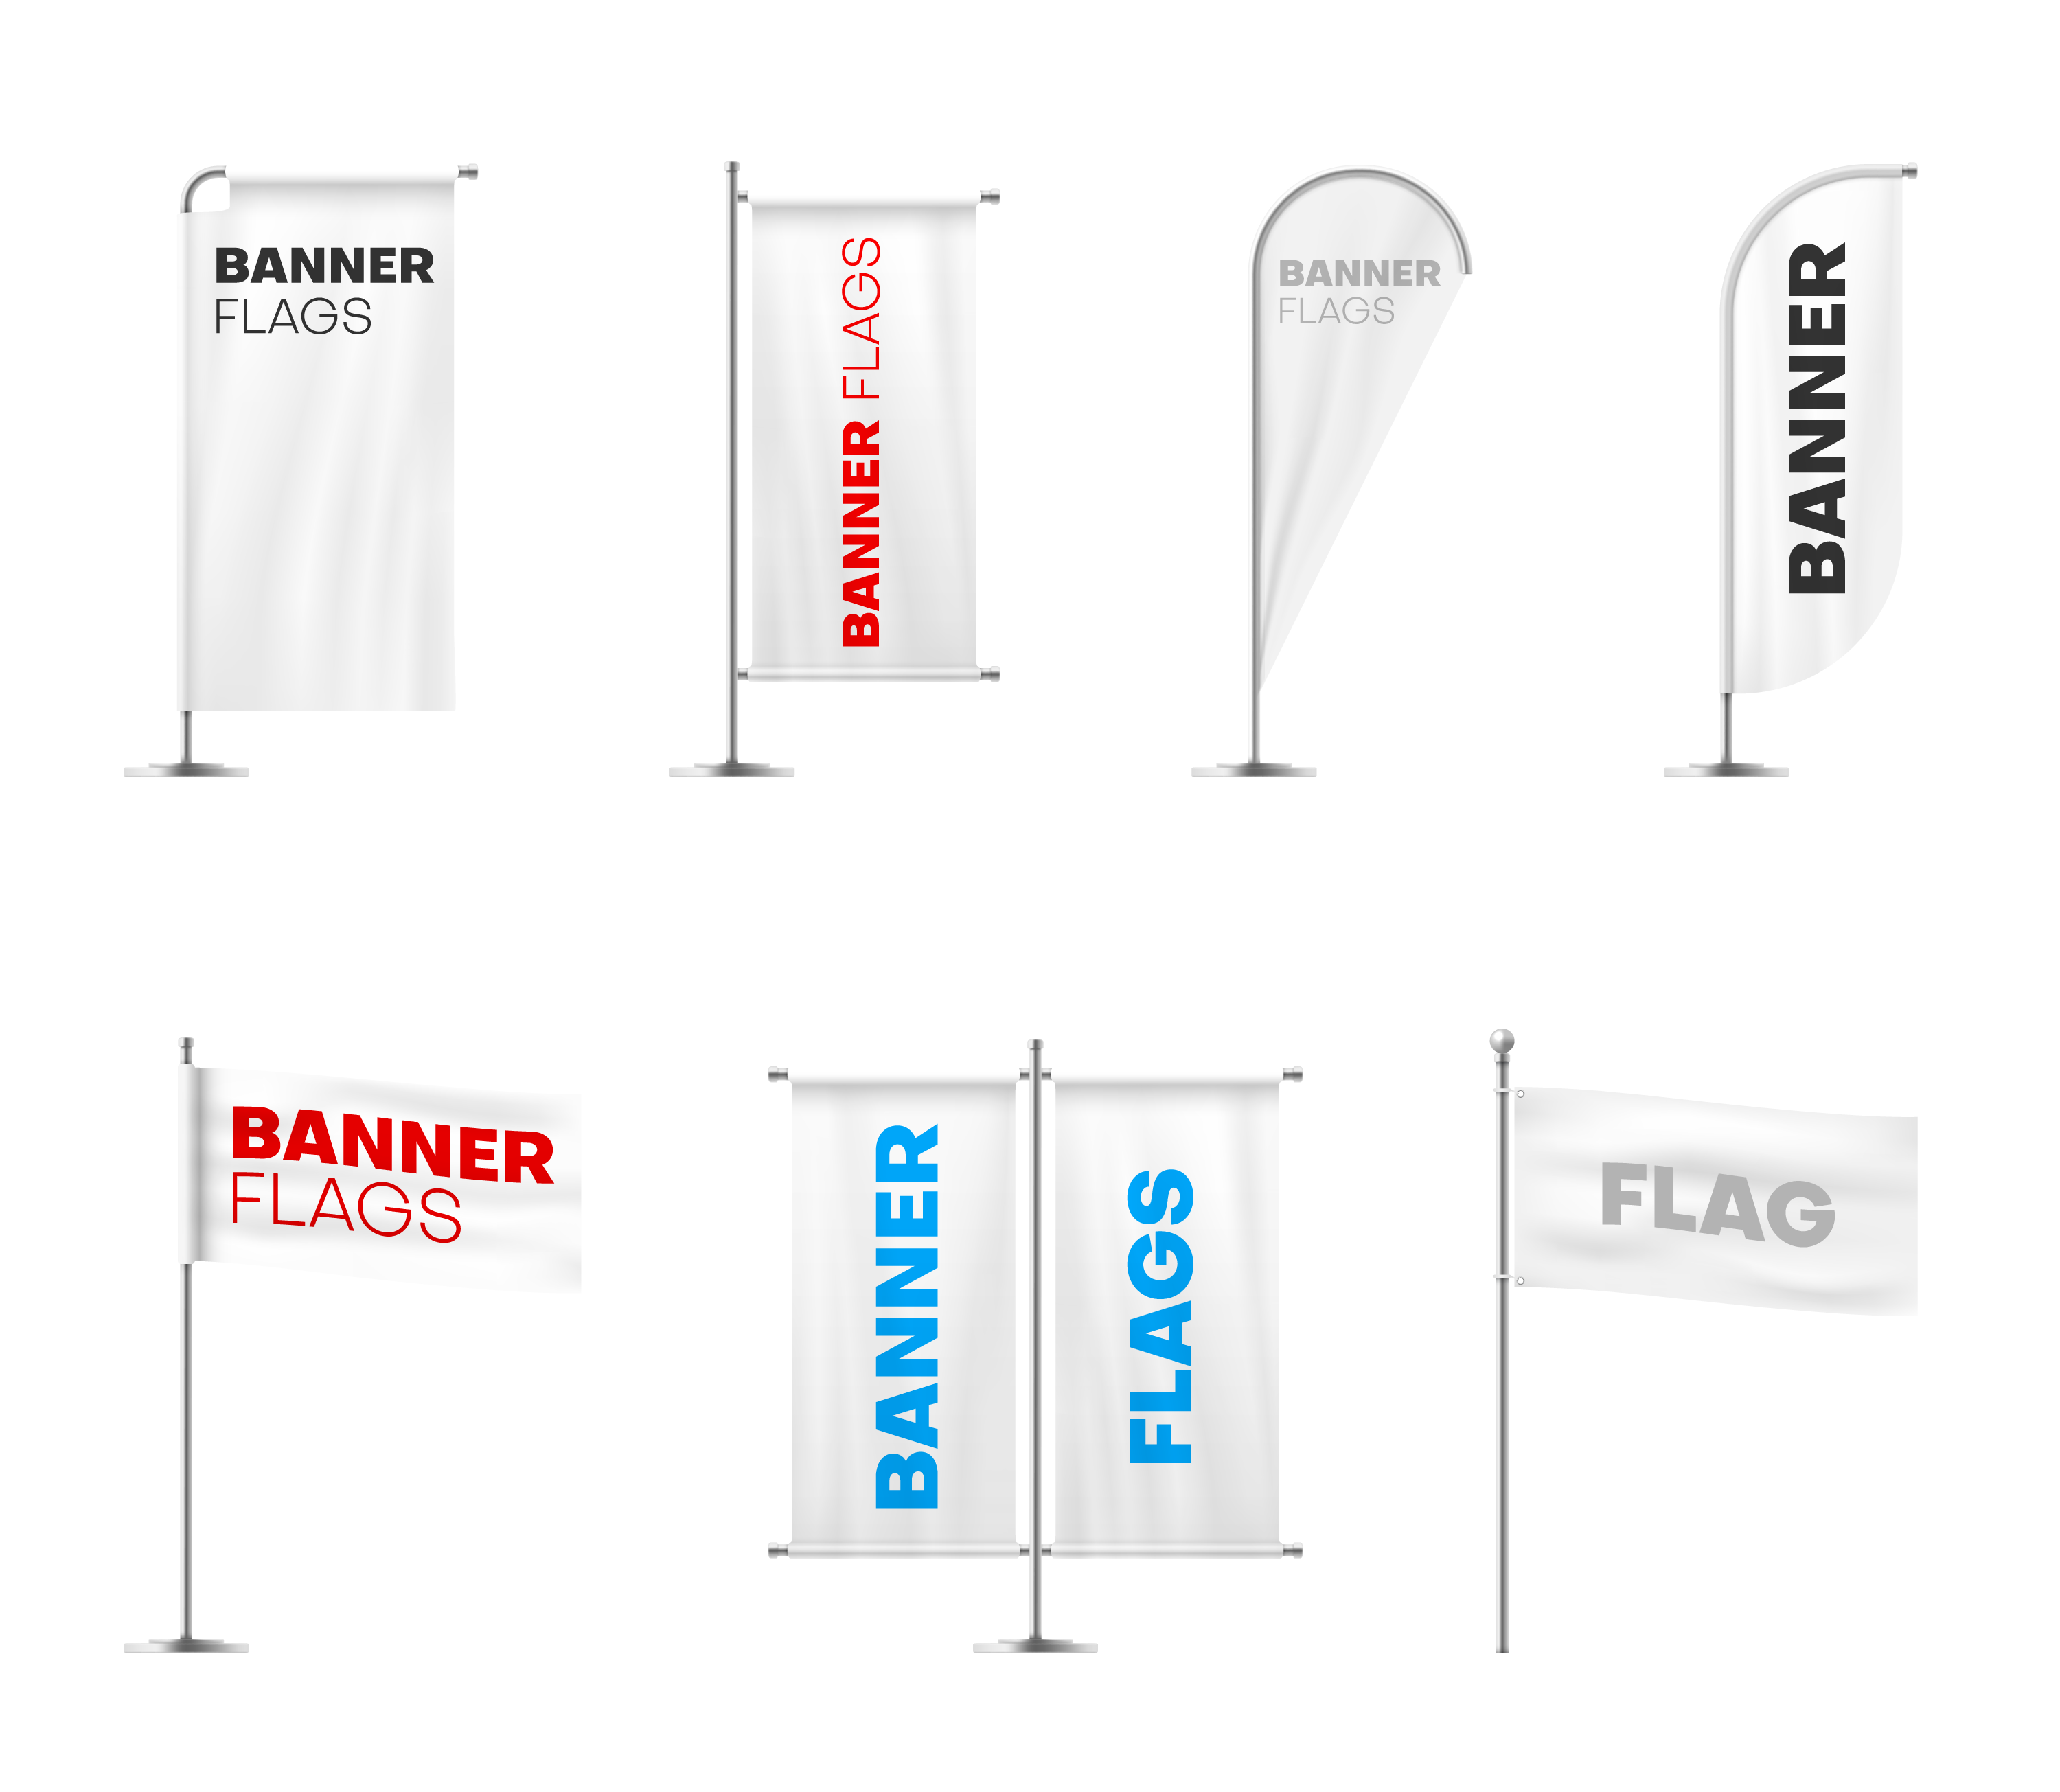 Banners and Flags